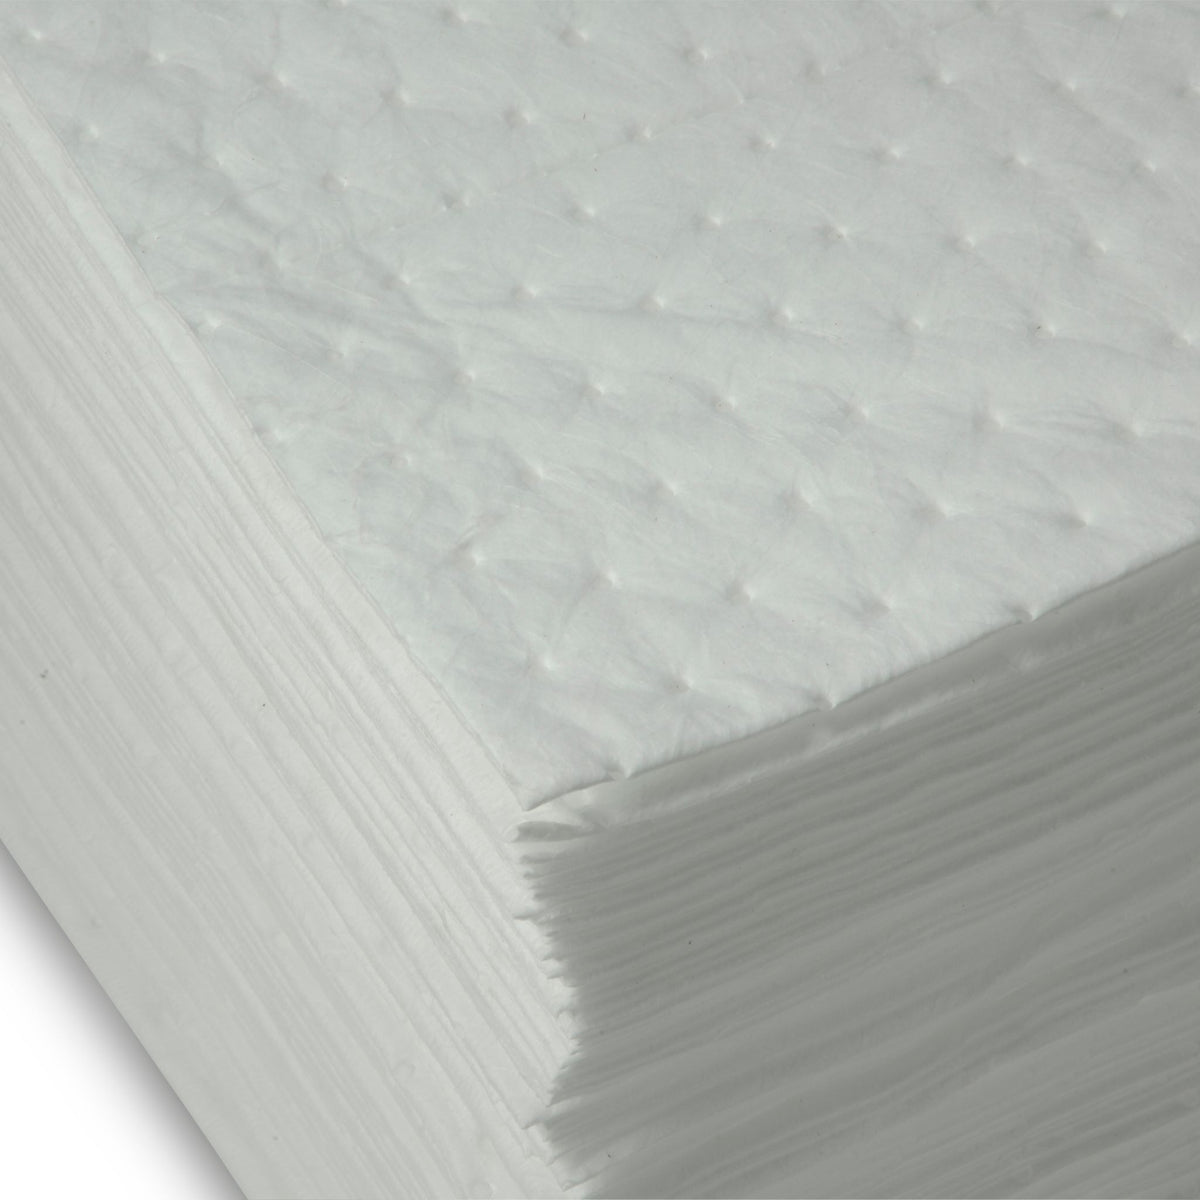 Oil Absorbent Pads Selection Guide